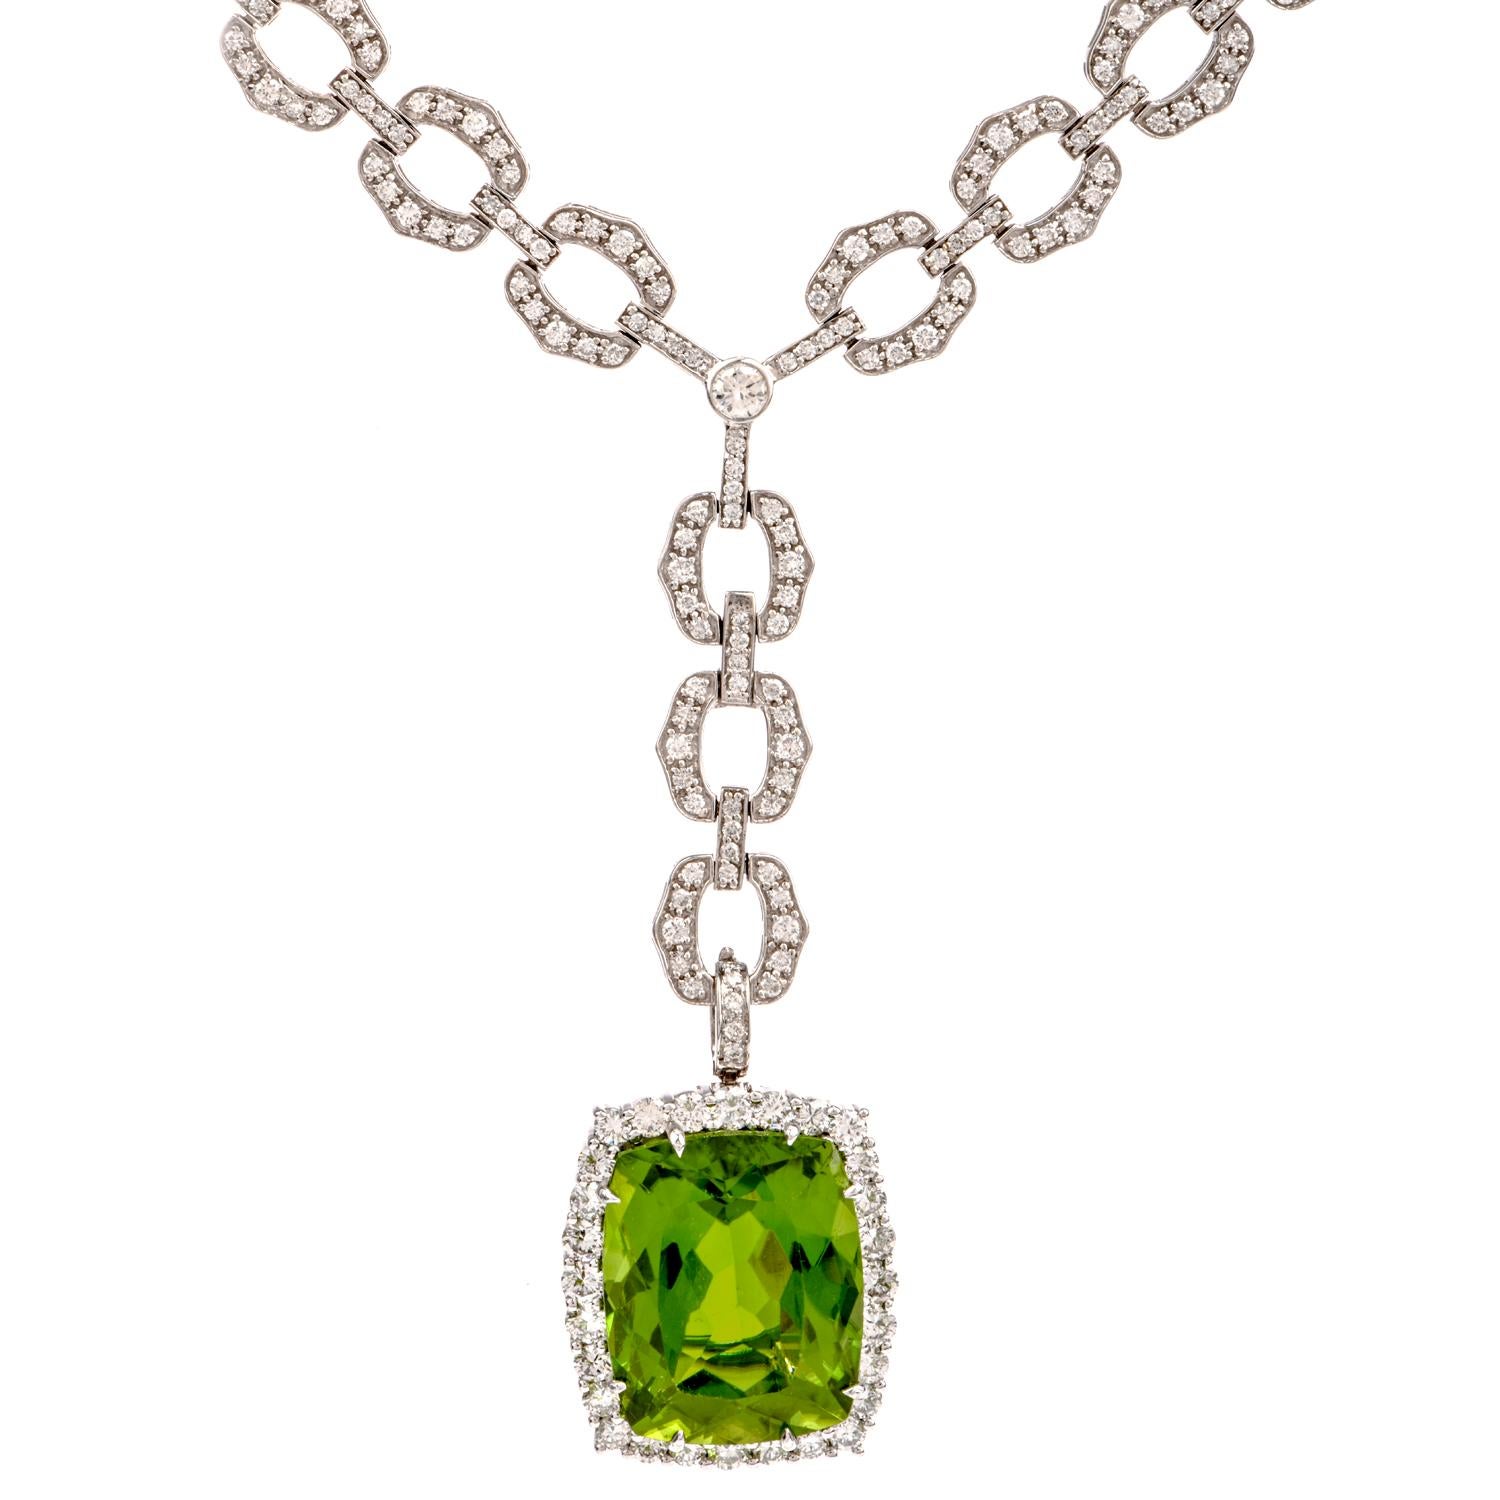 This eye catching Diamond and Peridot Pendant was crafted

in 18K white gold. 

With diamond covered links throughout, the detachable pendant 

enhancer features a Large Rectangular shaped Green Peridot, weighing approx. 33 carats dangling from the